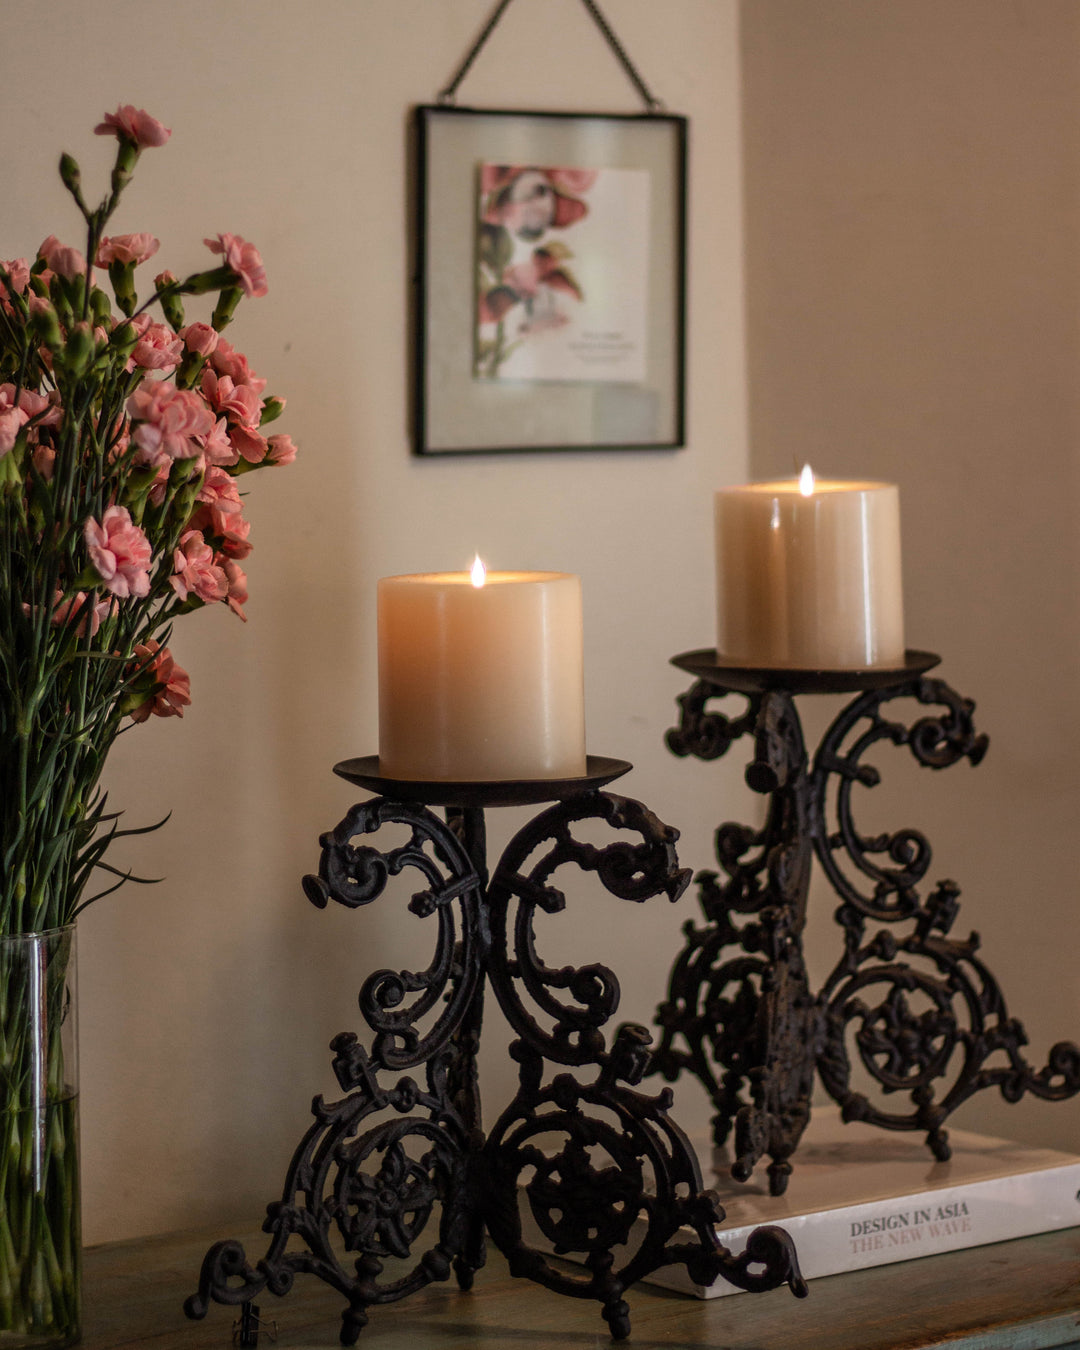 Cast Iron Candle Stand- Black